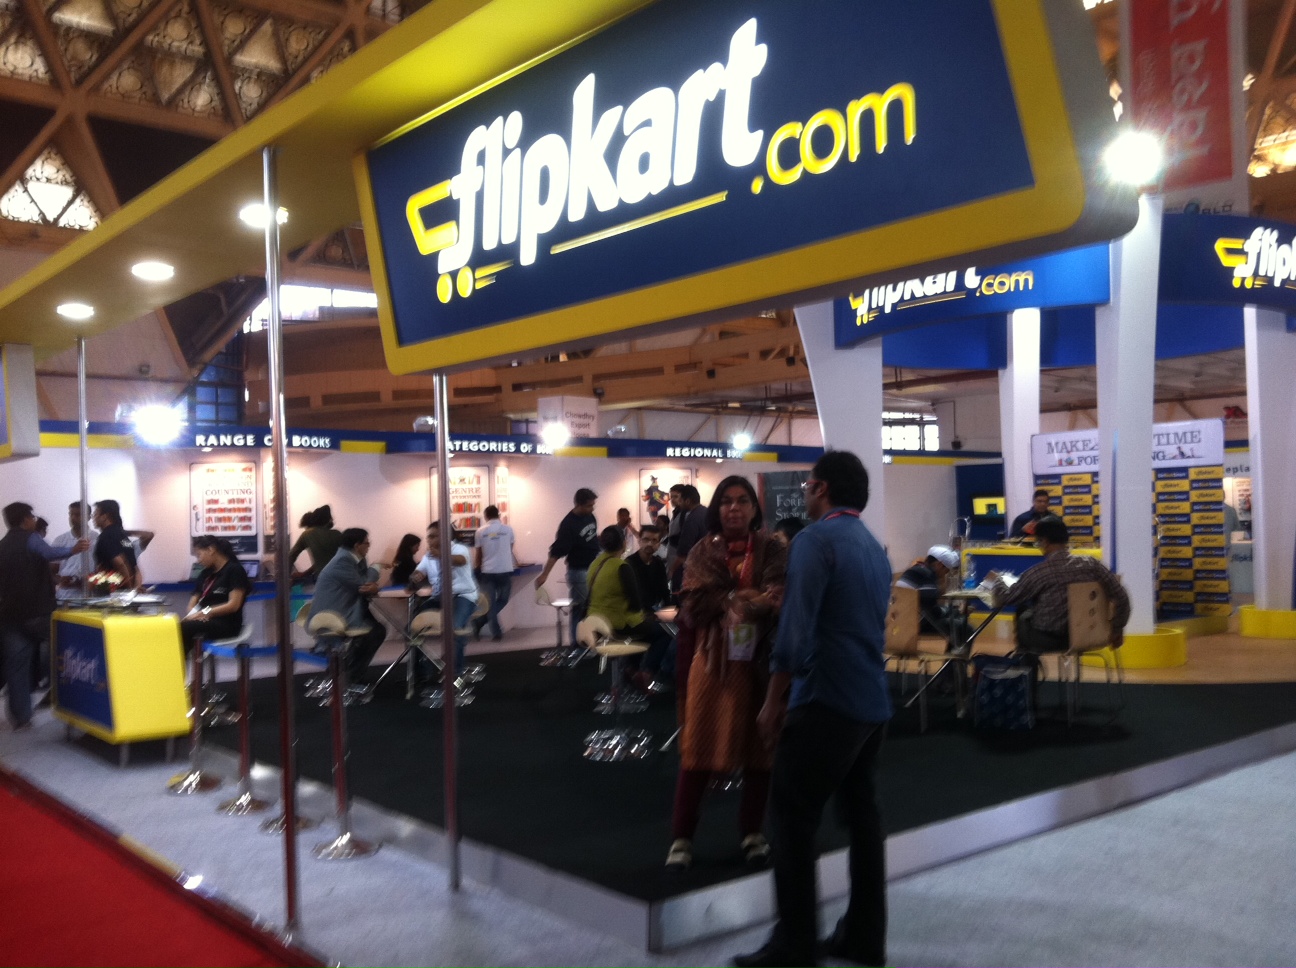 Flipkart plans to open “Brick and Morta stores” to small towns